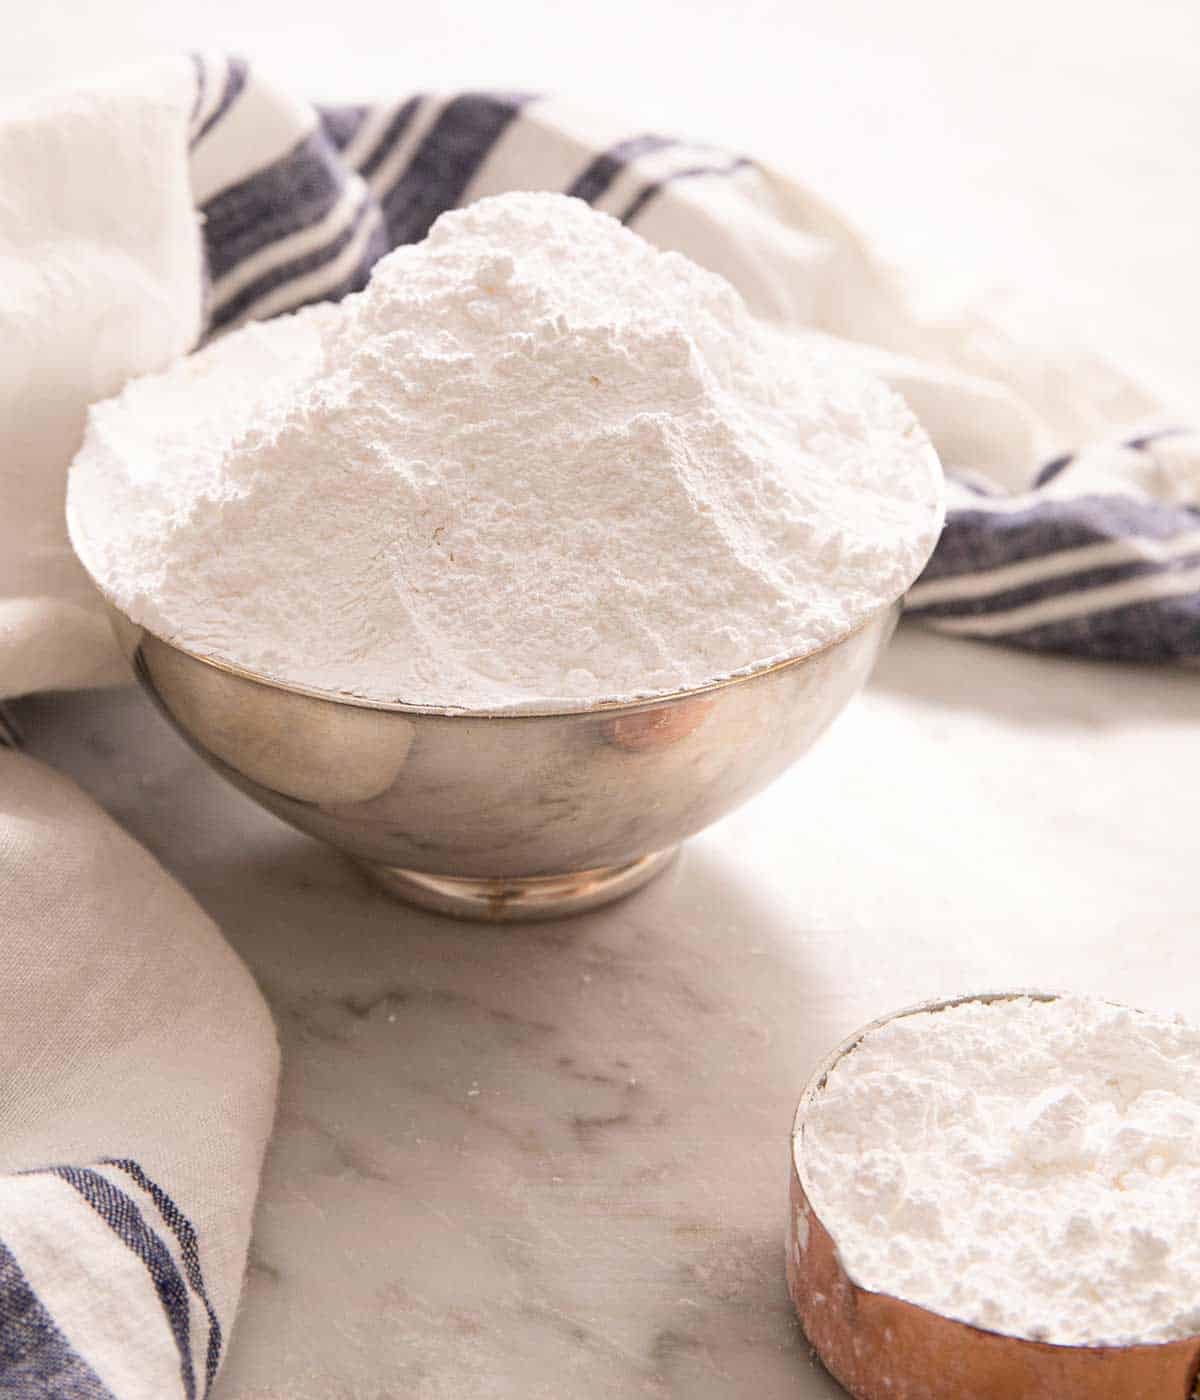 Powdered sugar piled up high in a small bowl